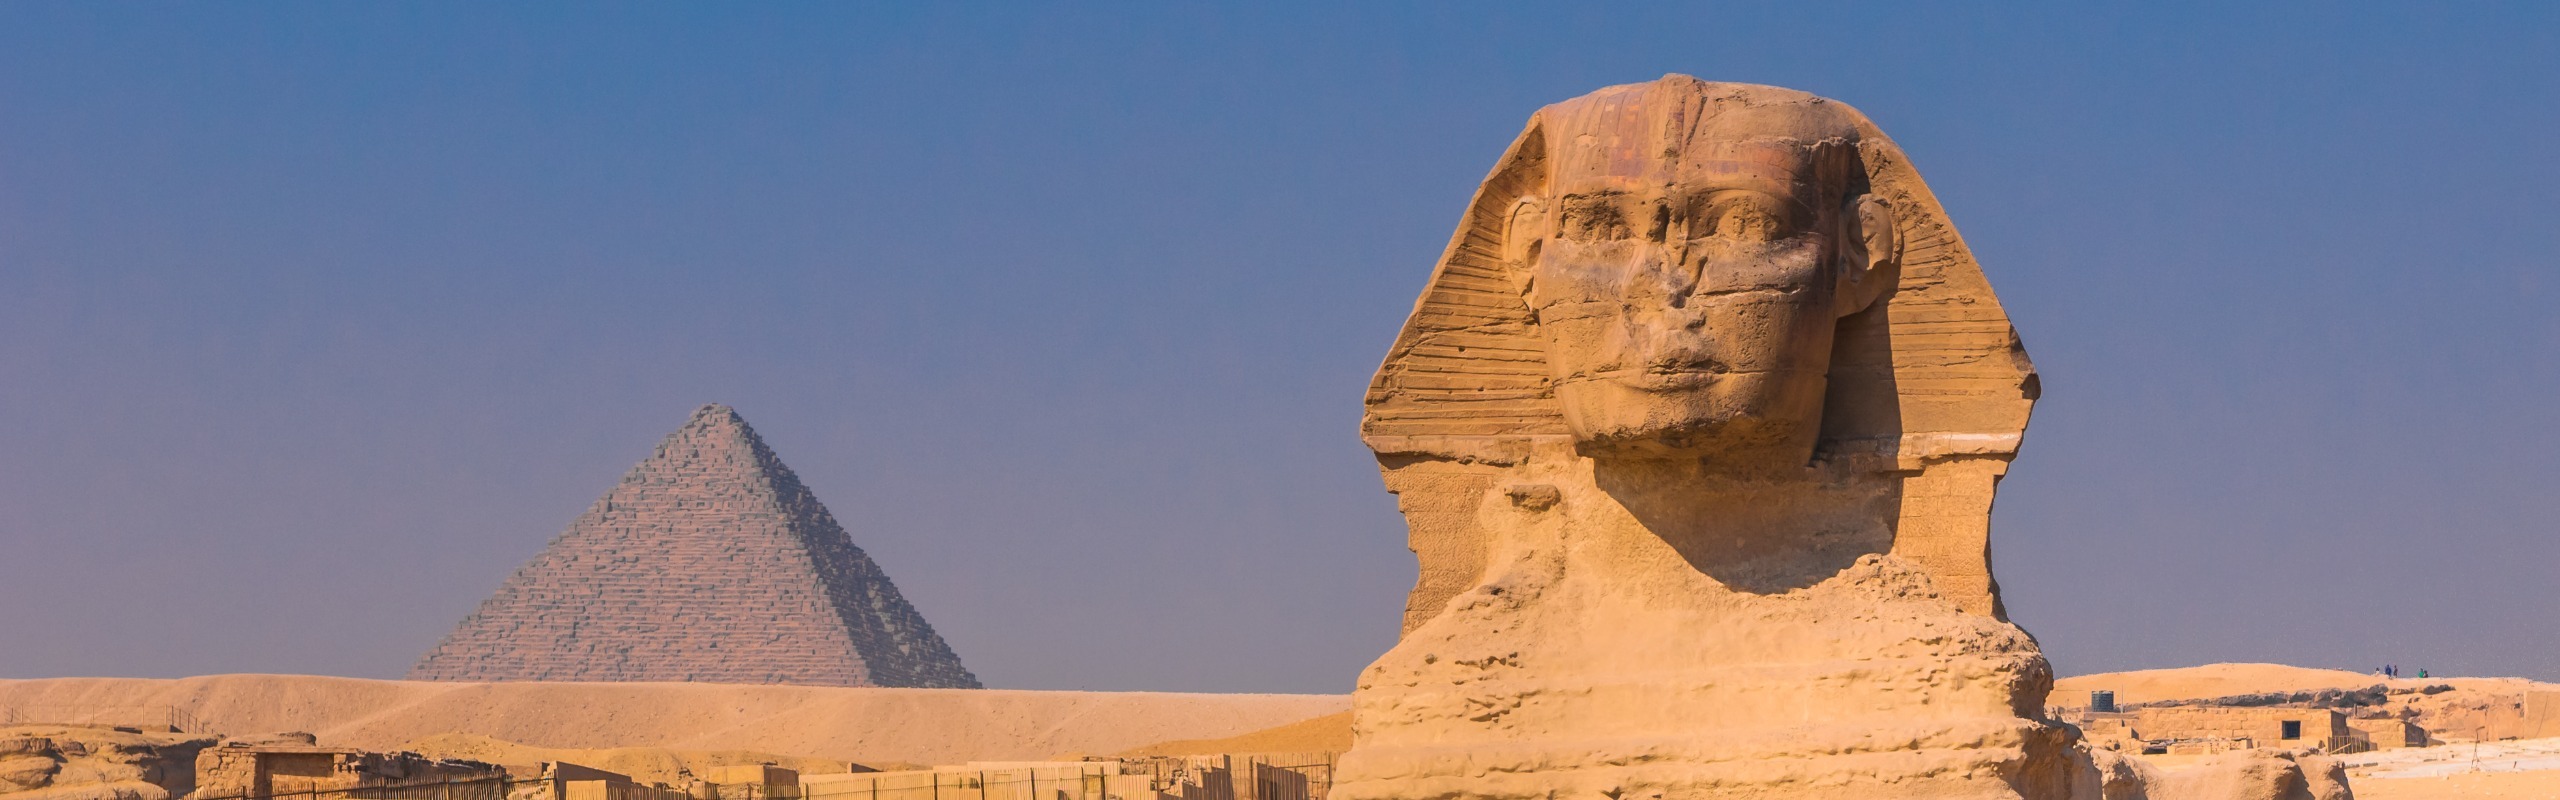 The Great Sphinx of Giza: Uncover Its History and Facts You Didn’t Know